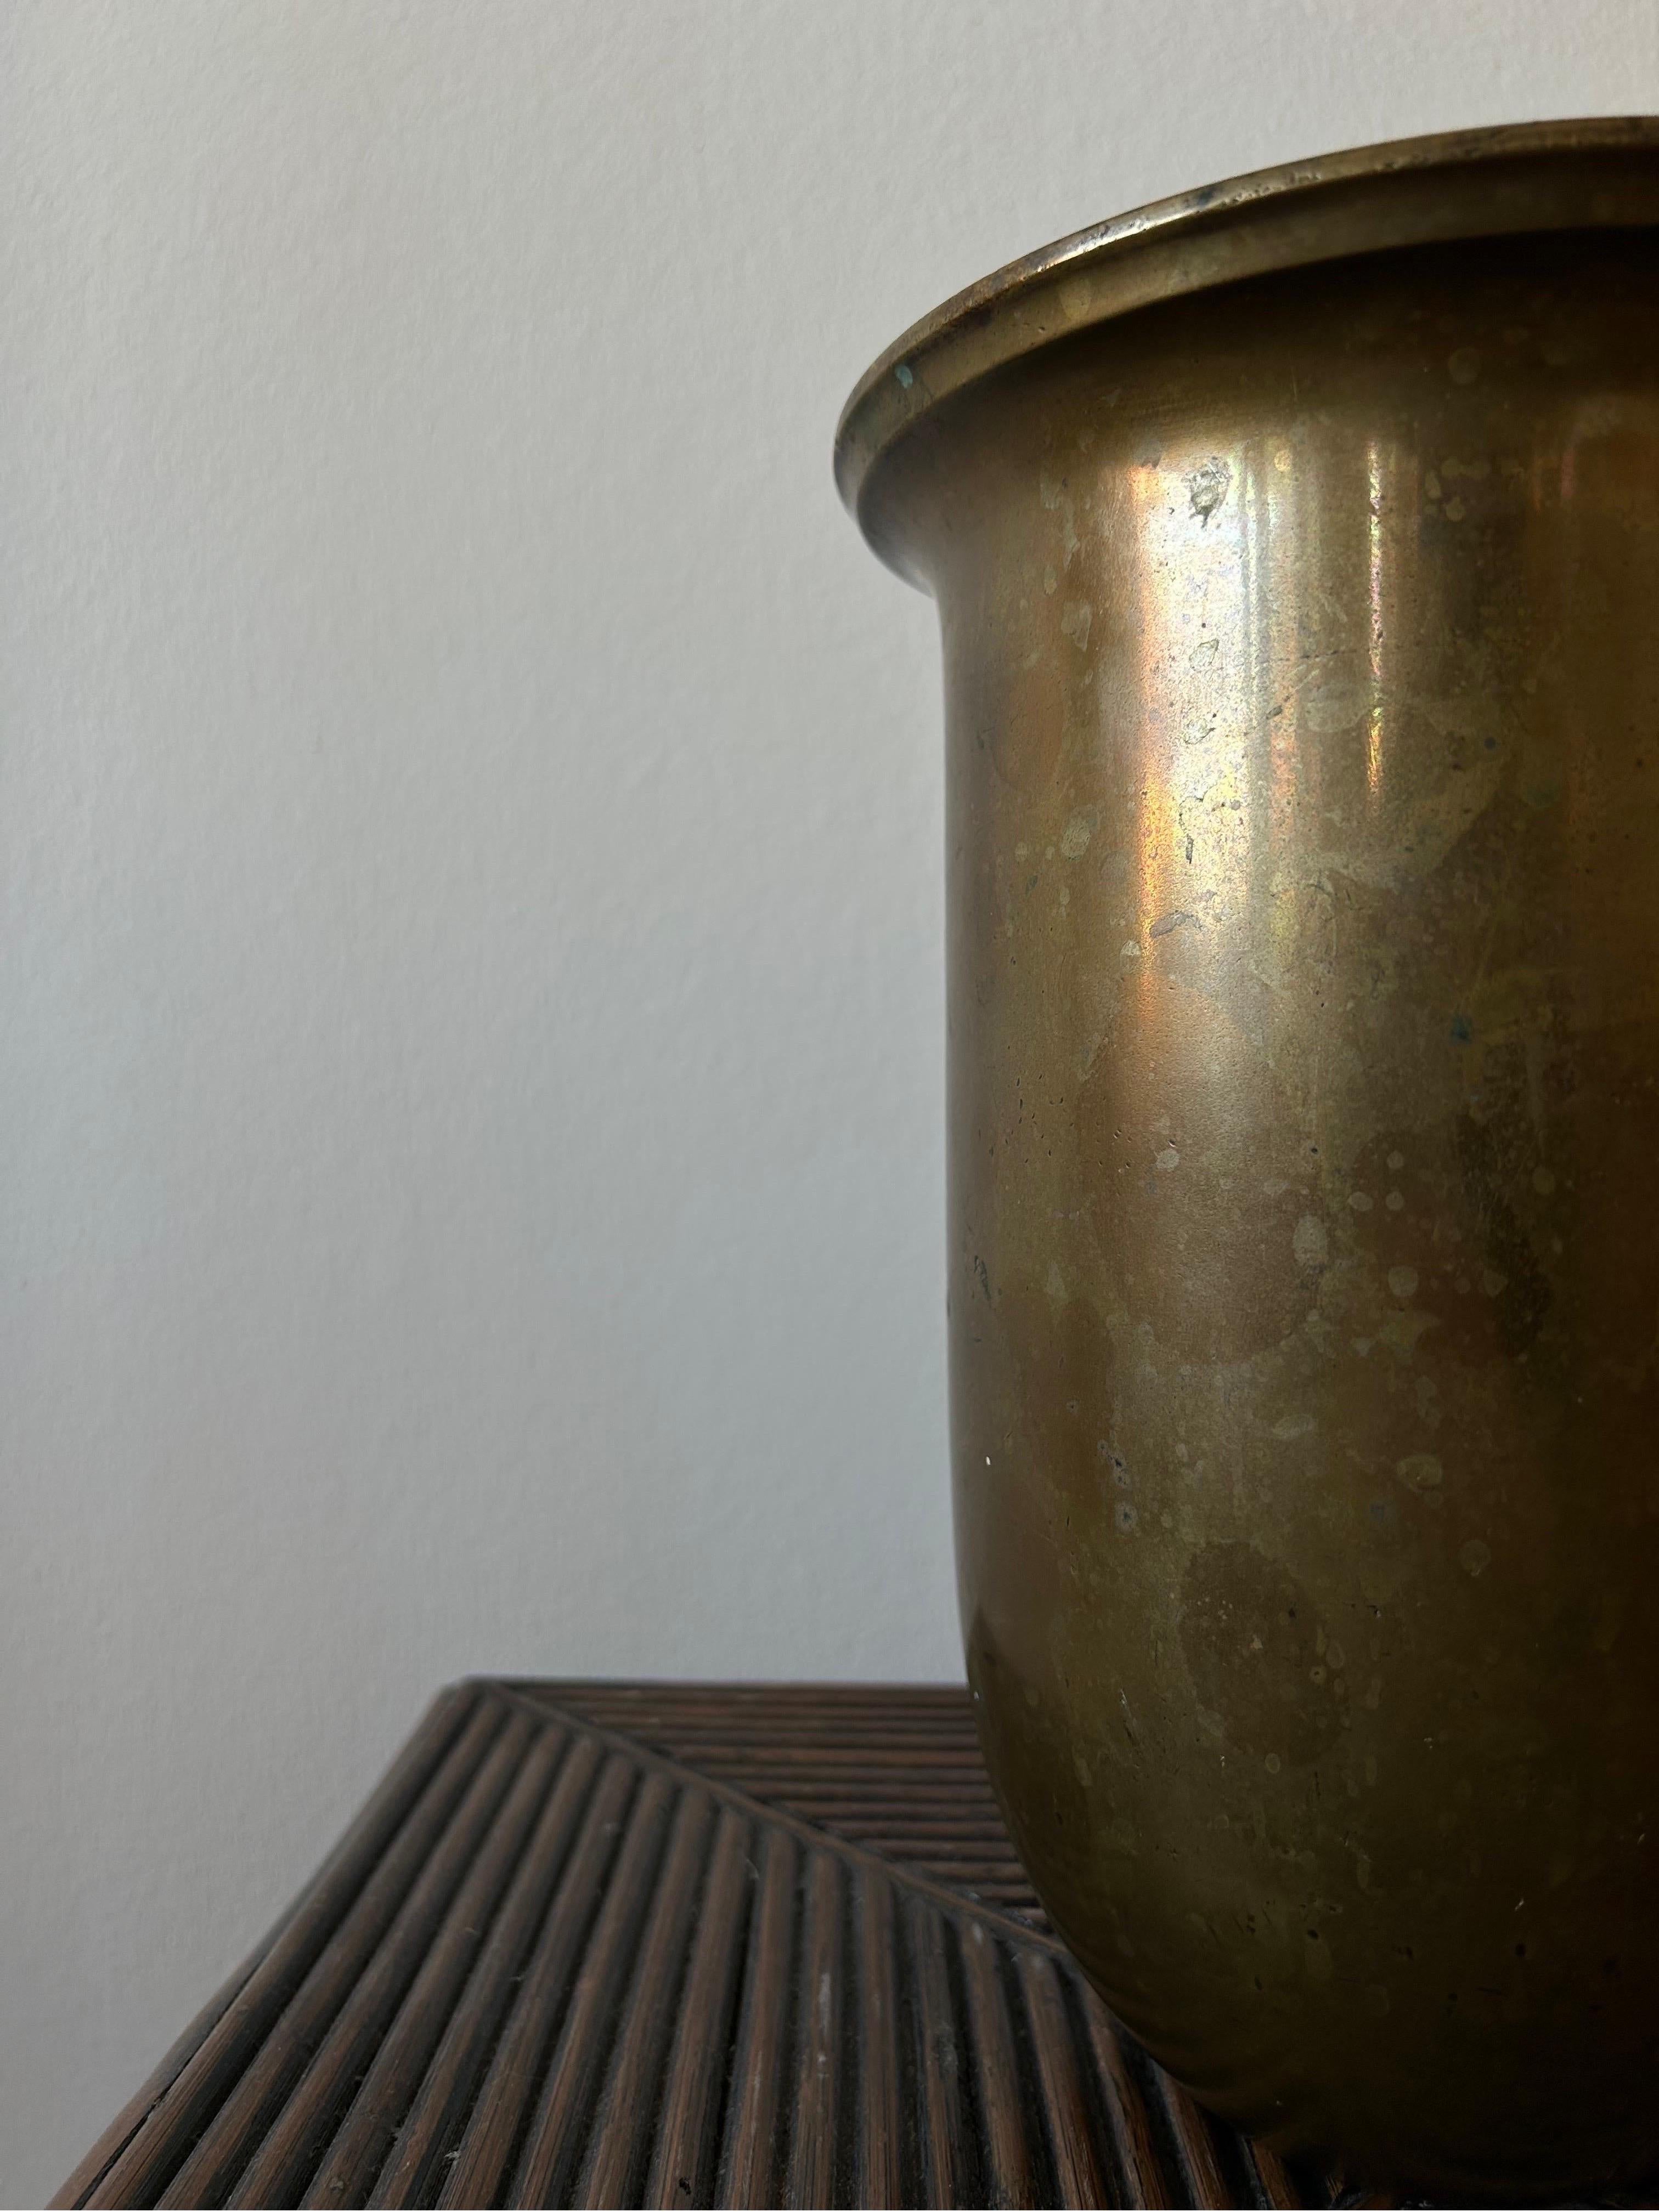 Rare and important large Just Andersen bronze vase model B1578.

The vase is in good condition with a beautiful natural patina that it has gotten after many’s years of use.

This vase is a perfect piece for any interior and will fit any type of